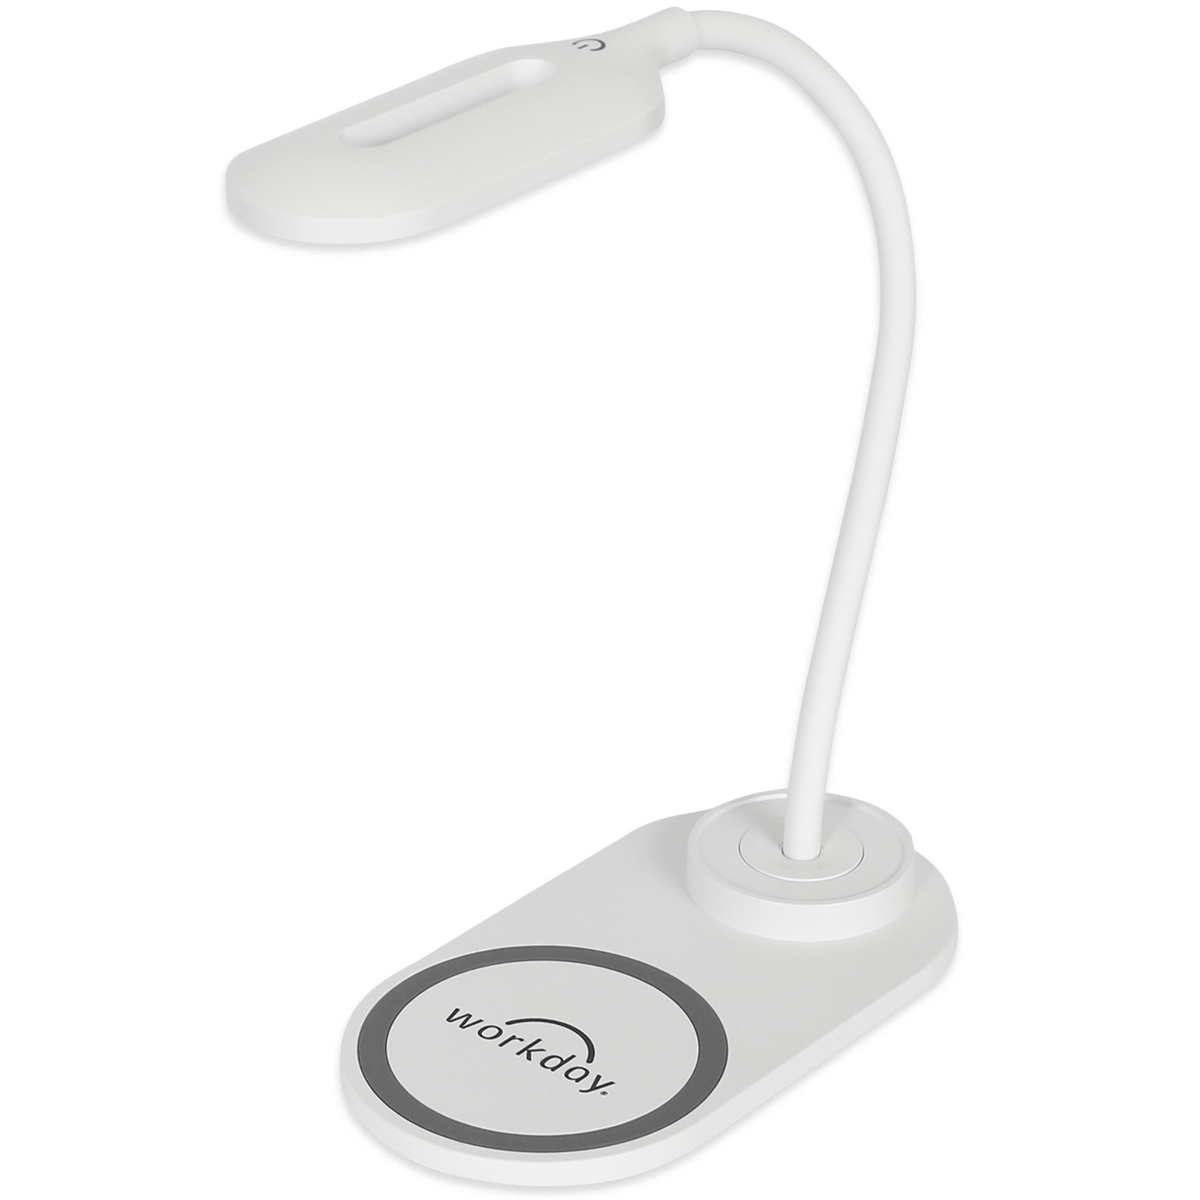 LED Desk Lamp w/ Wireless Charger